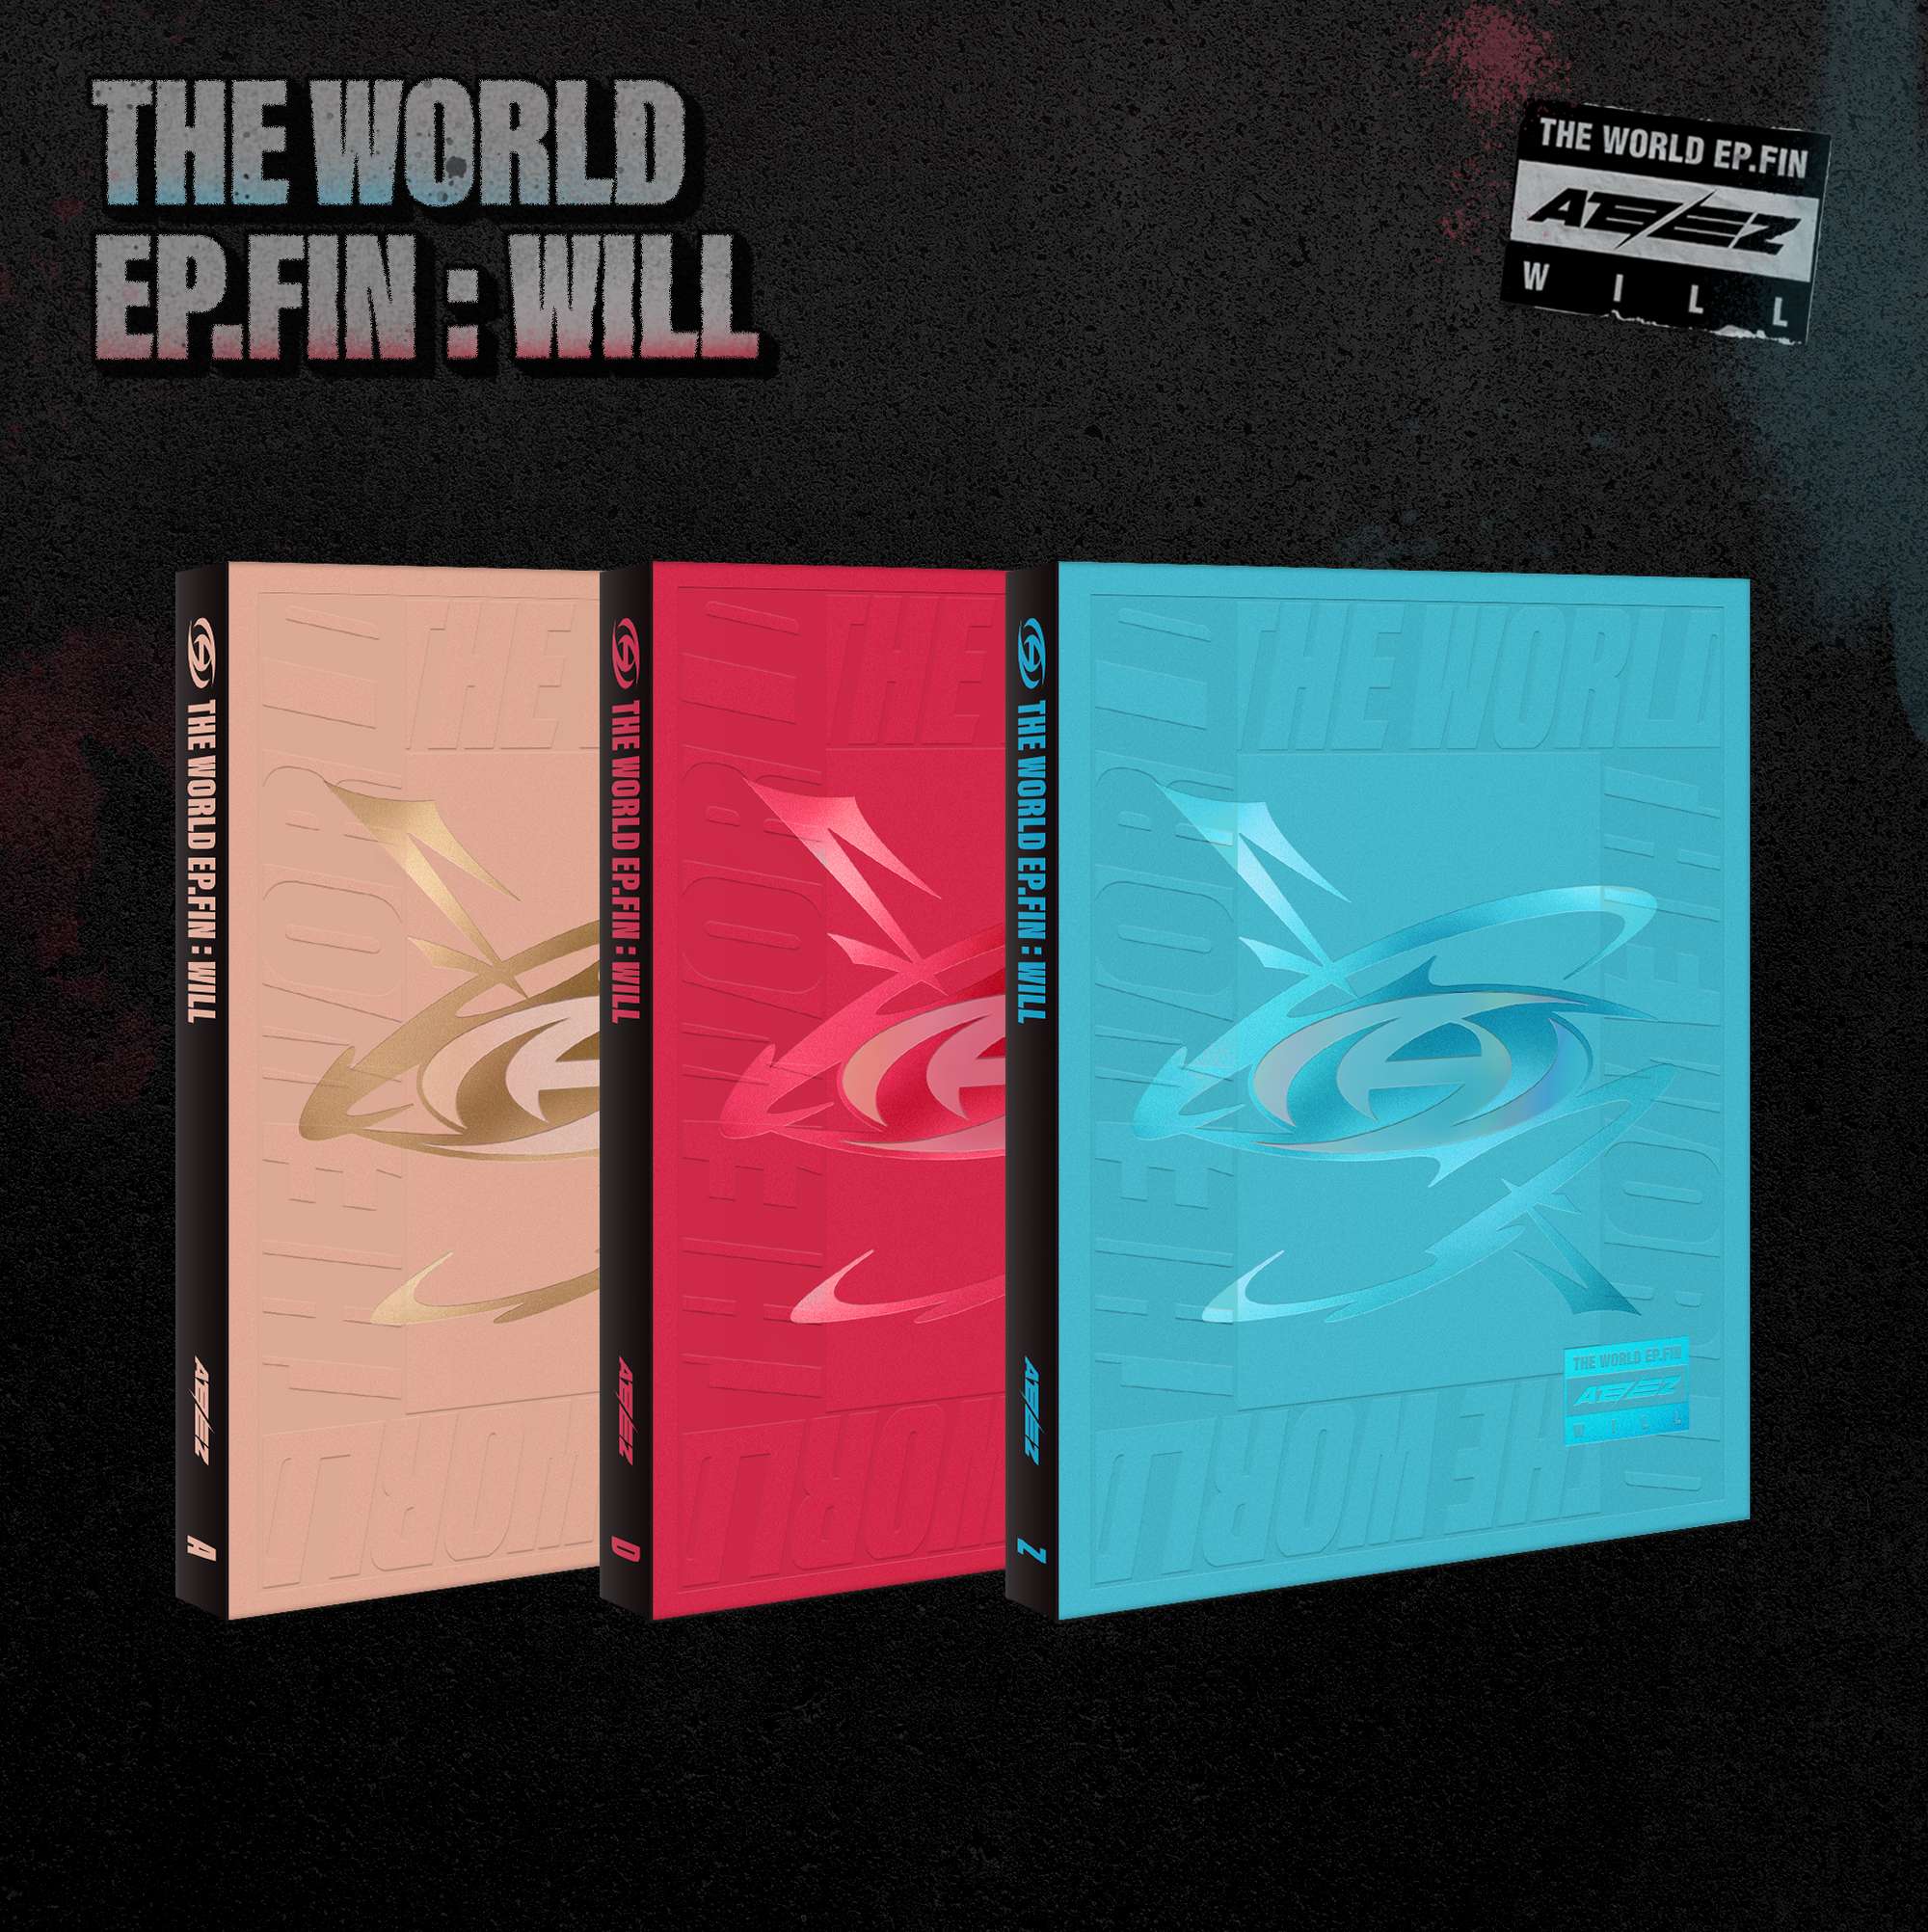 [Set] ATEEZ - [THE WORLD EP.FIN : WILL] (A + DIARY + Z VER)